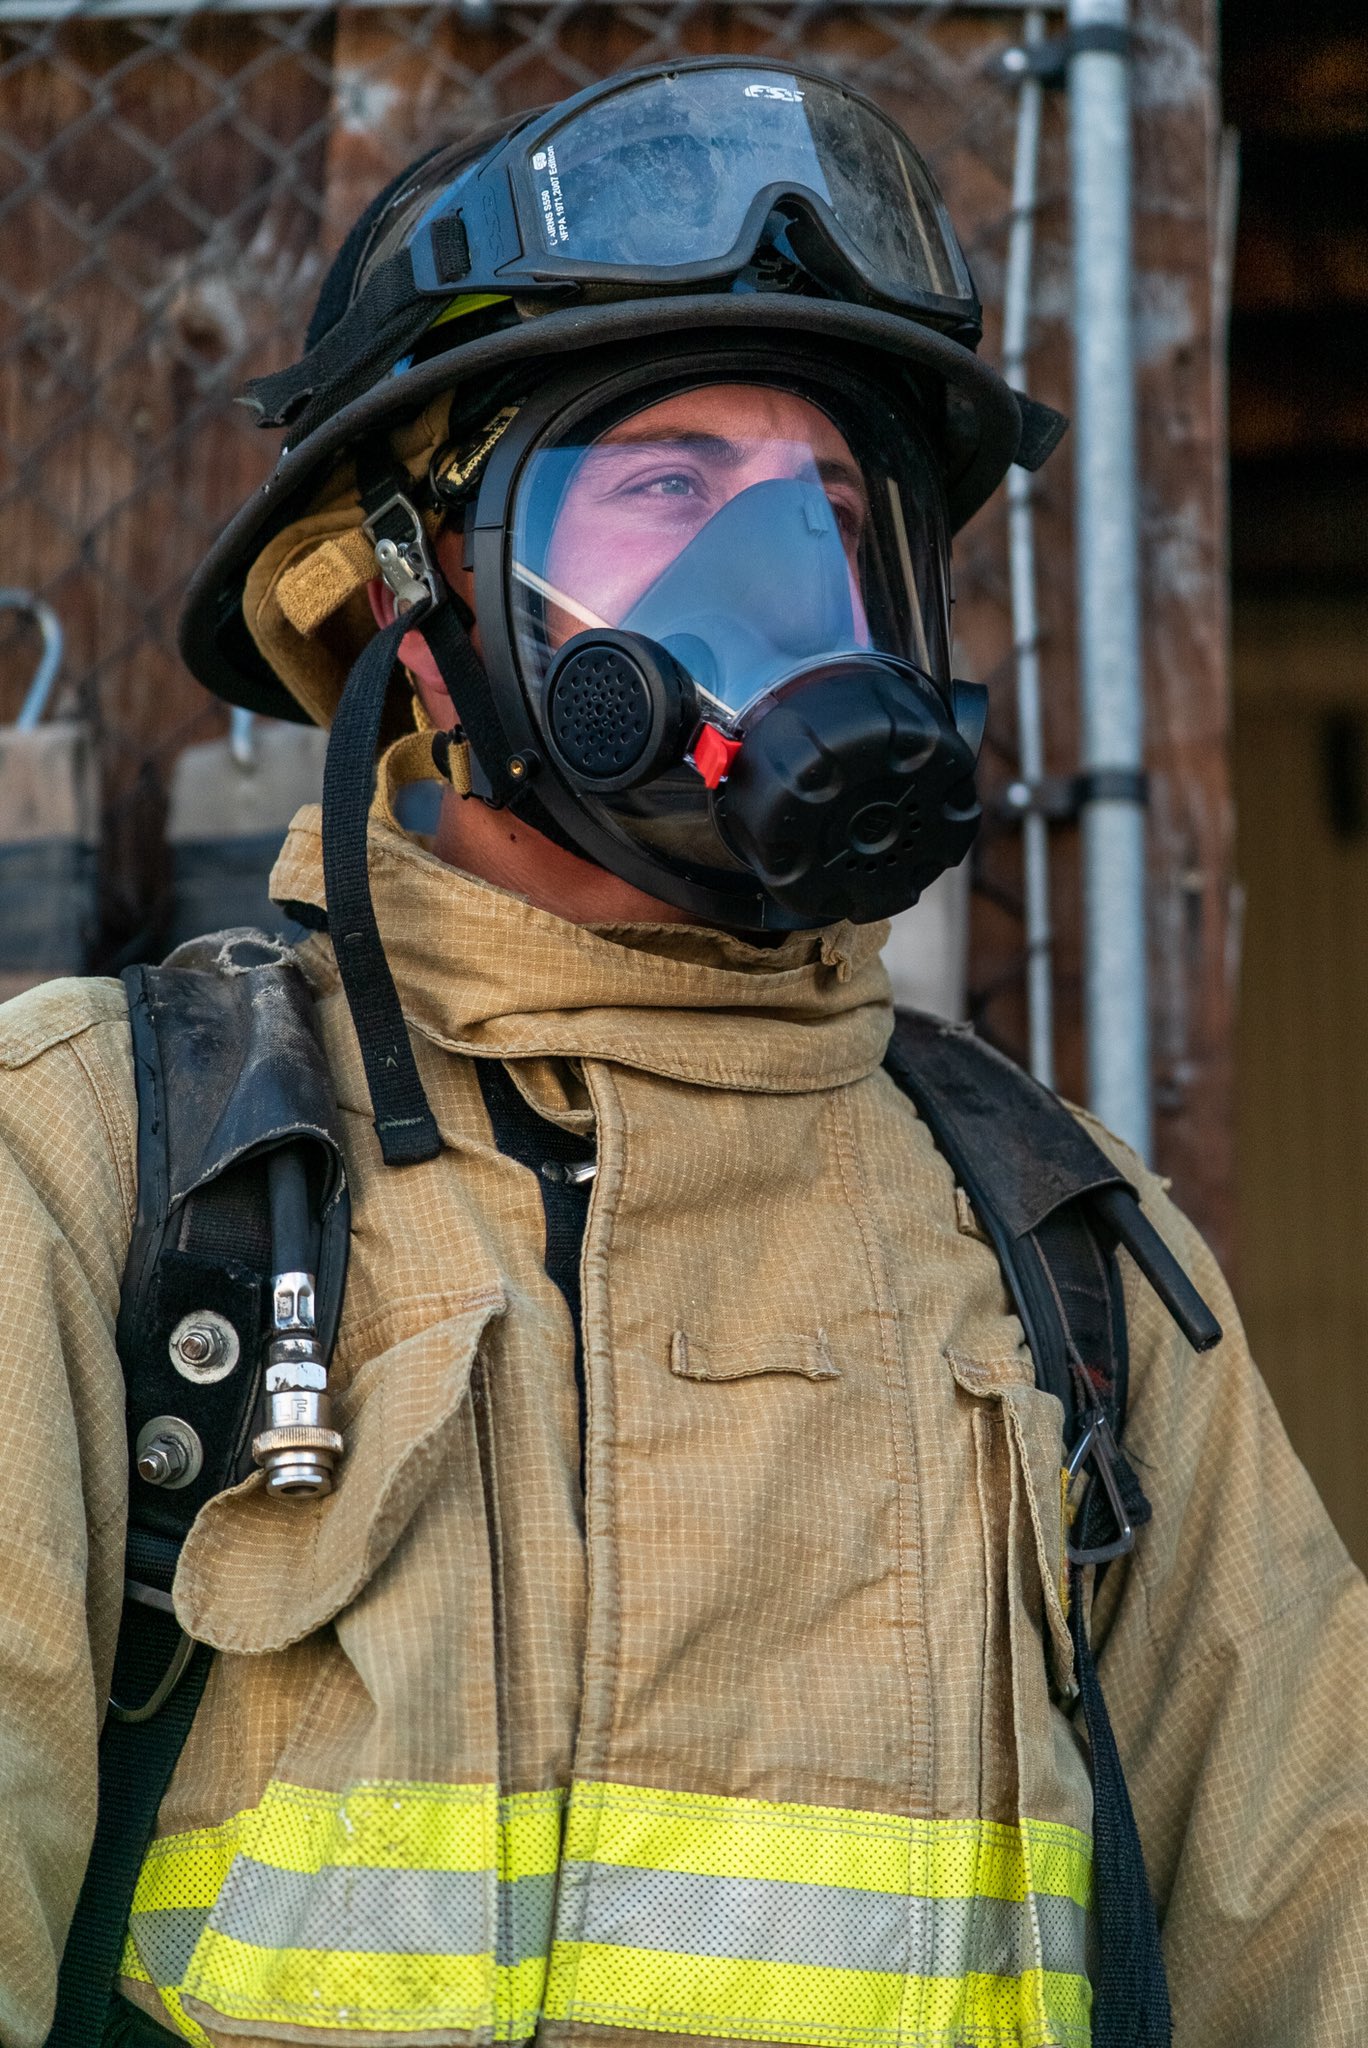 Training Mask on Twitter: "All New Designed Training Mask XRT is available! worrying about emptying tanks here is the best training device for your SCBA mask! https://t.co/iIQ7DHiedE" / Twitter